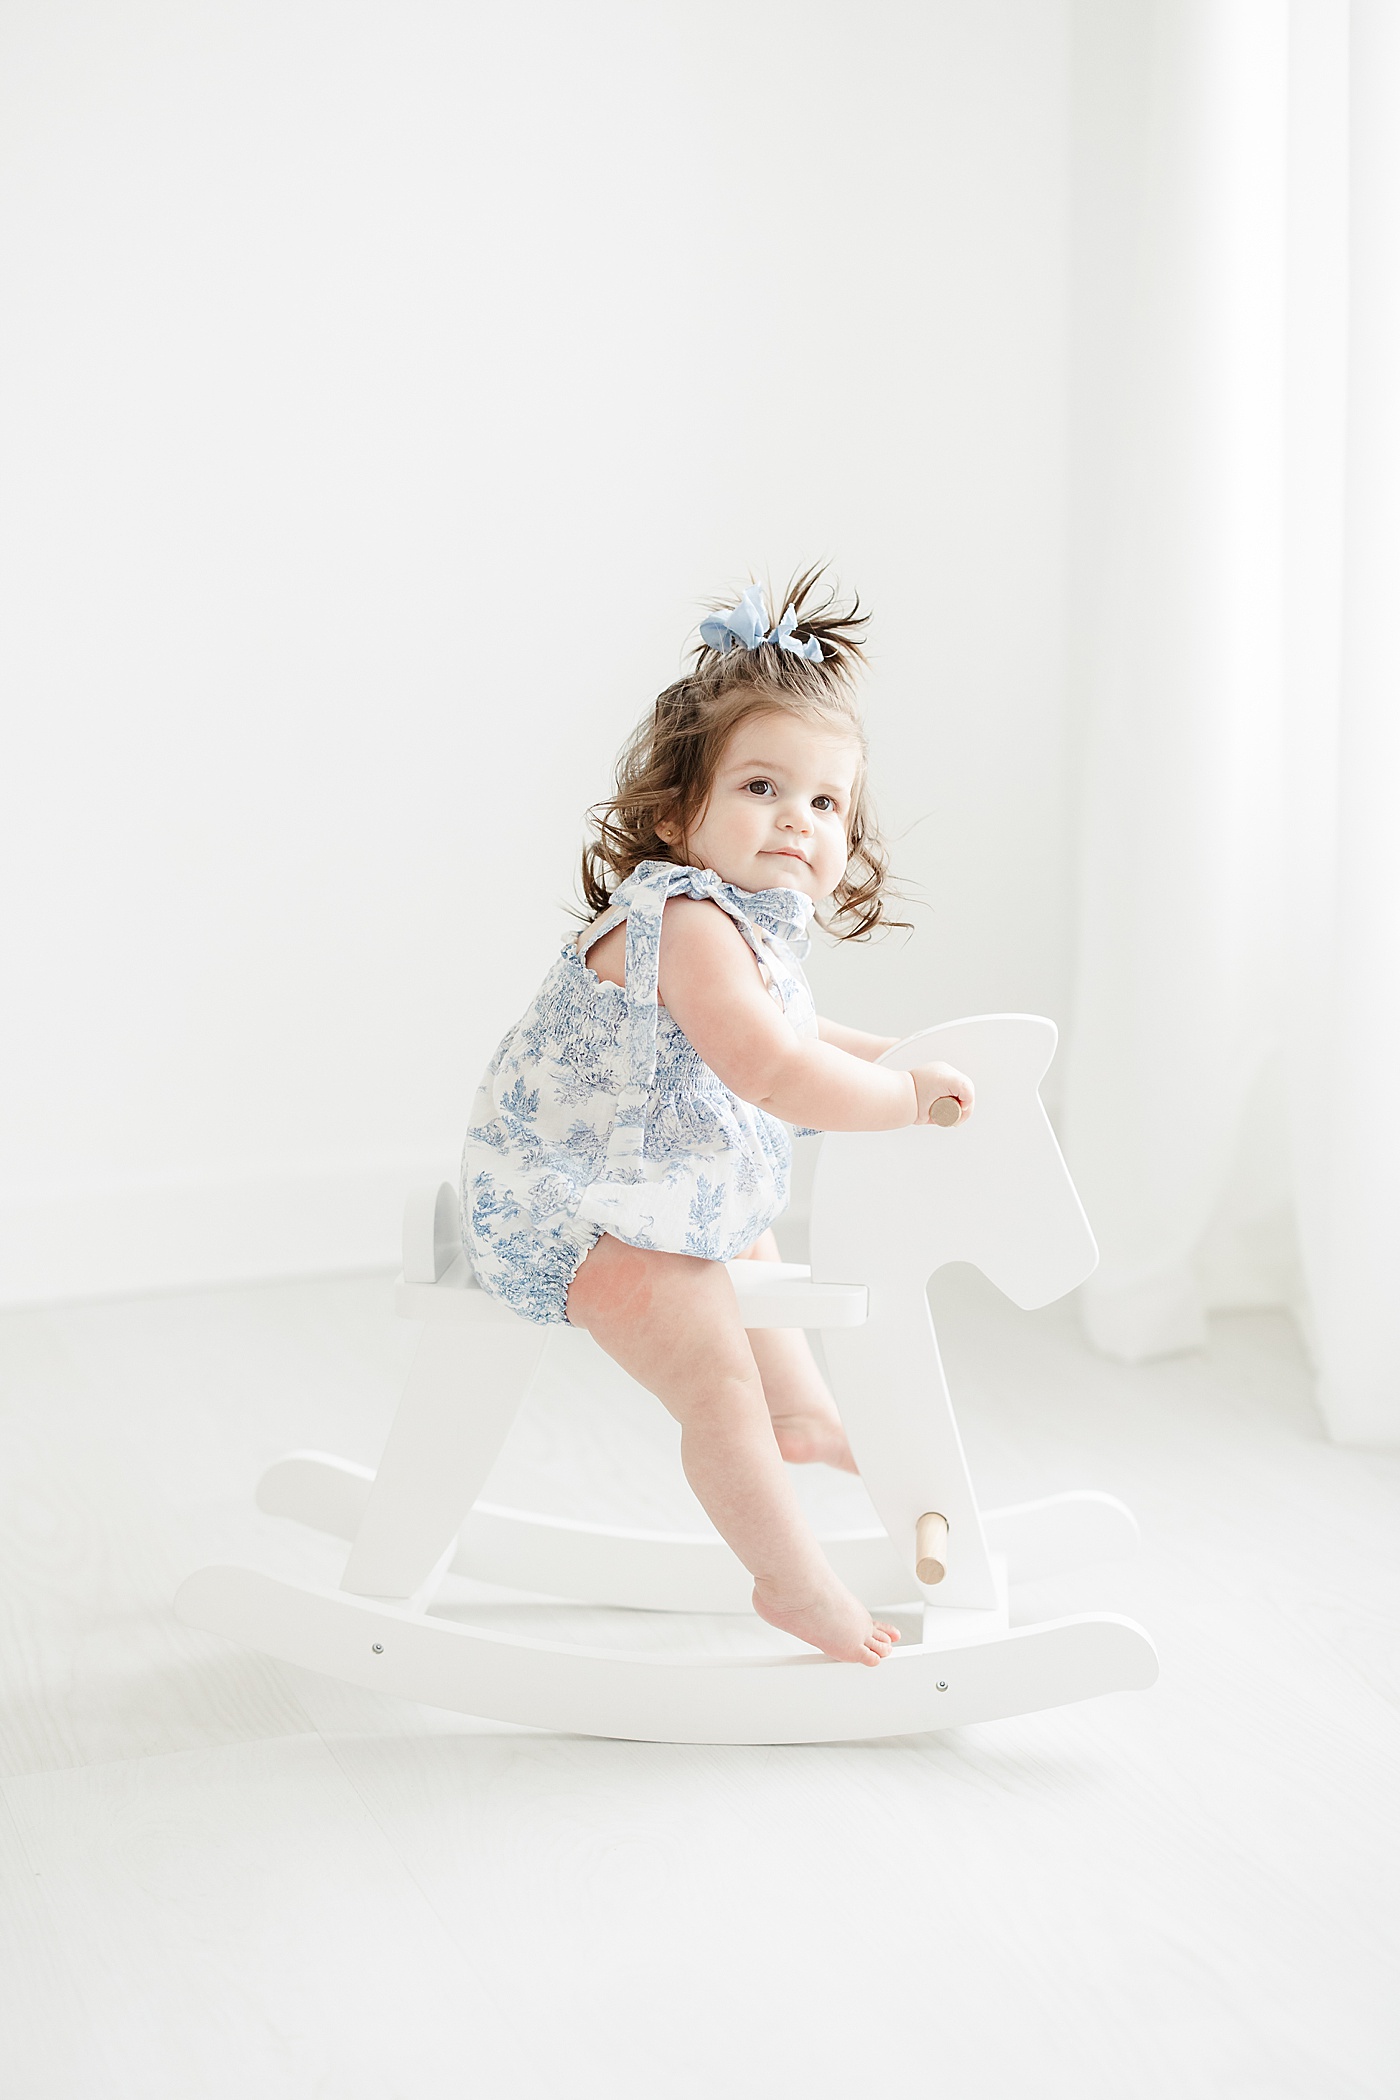 One year old sitting on rocking horse during first birthday photoshoot | Kristin Wood Photography